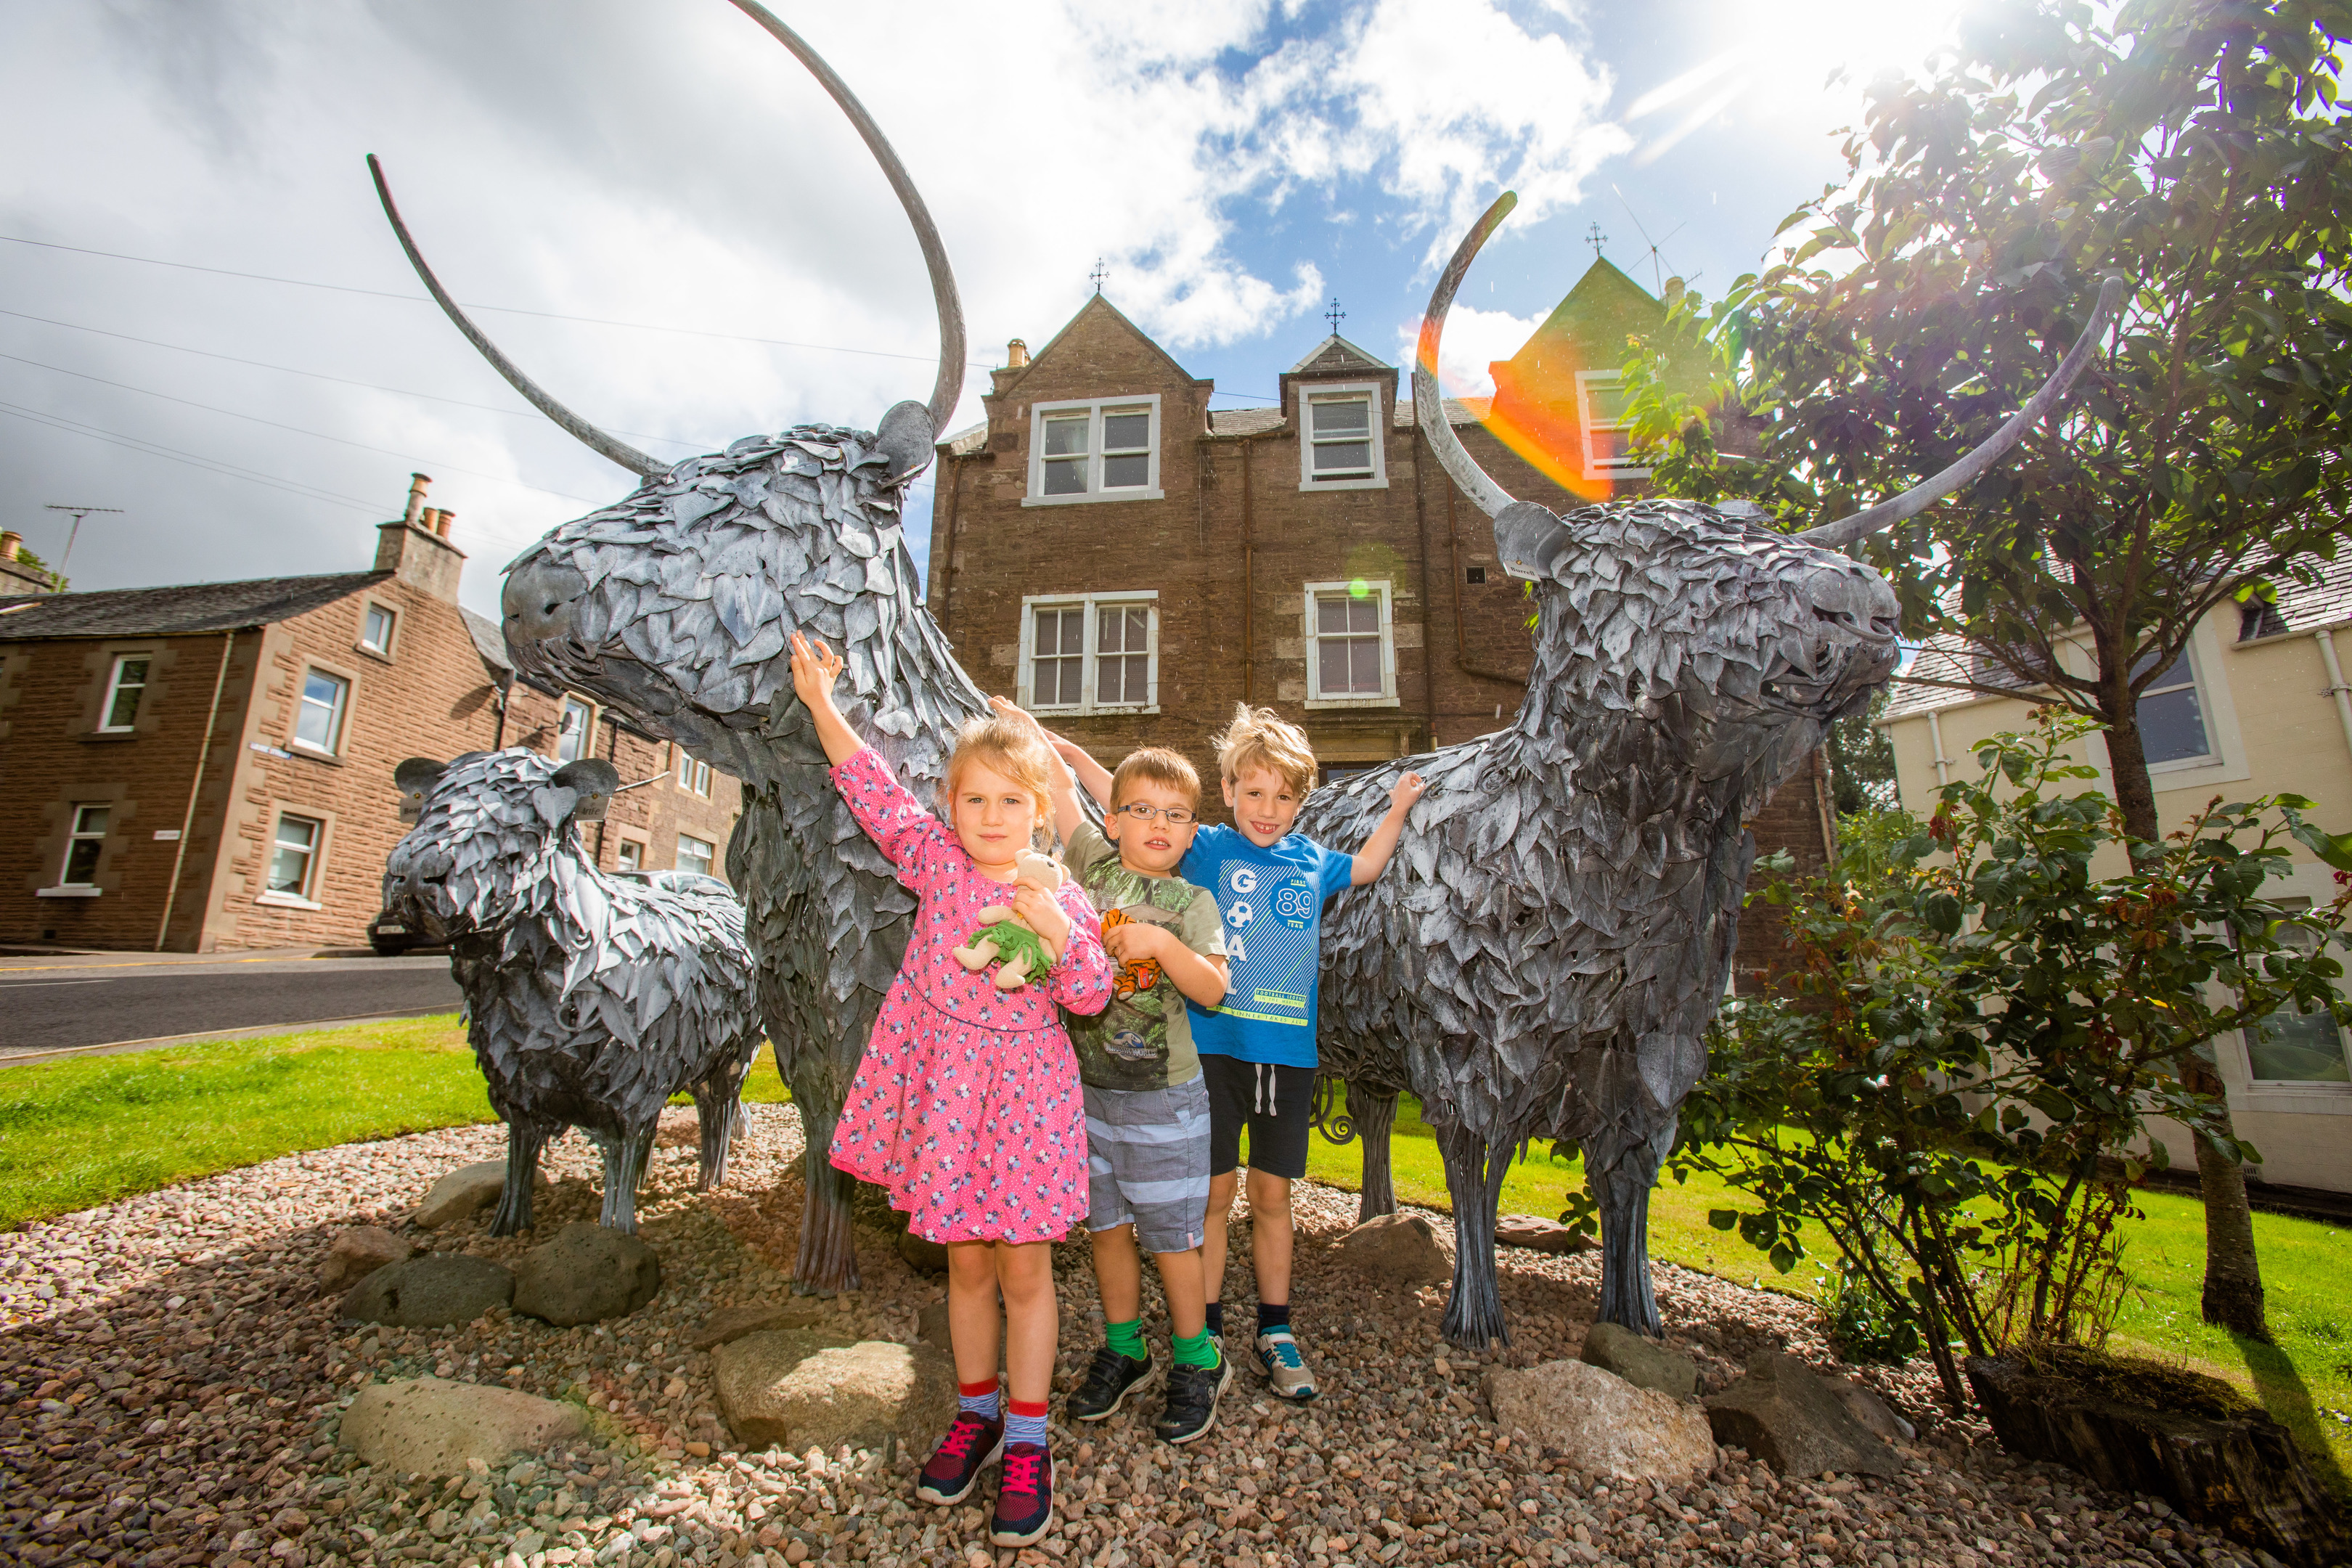 The Cows, being visited by the Cunningham family (left to right), Layla Cunningham (aged 4), twin brother Tommy Cunningham  and brother Daniel Cunningham (aged 6, all from Perth).